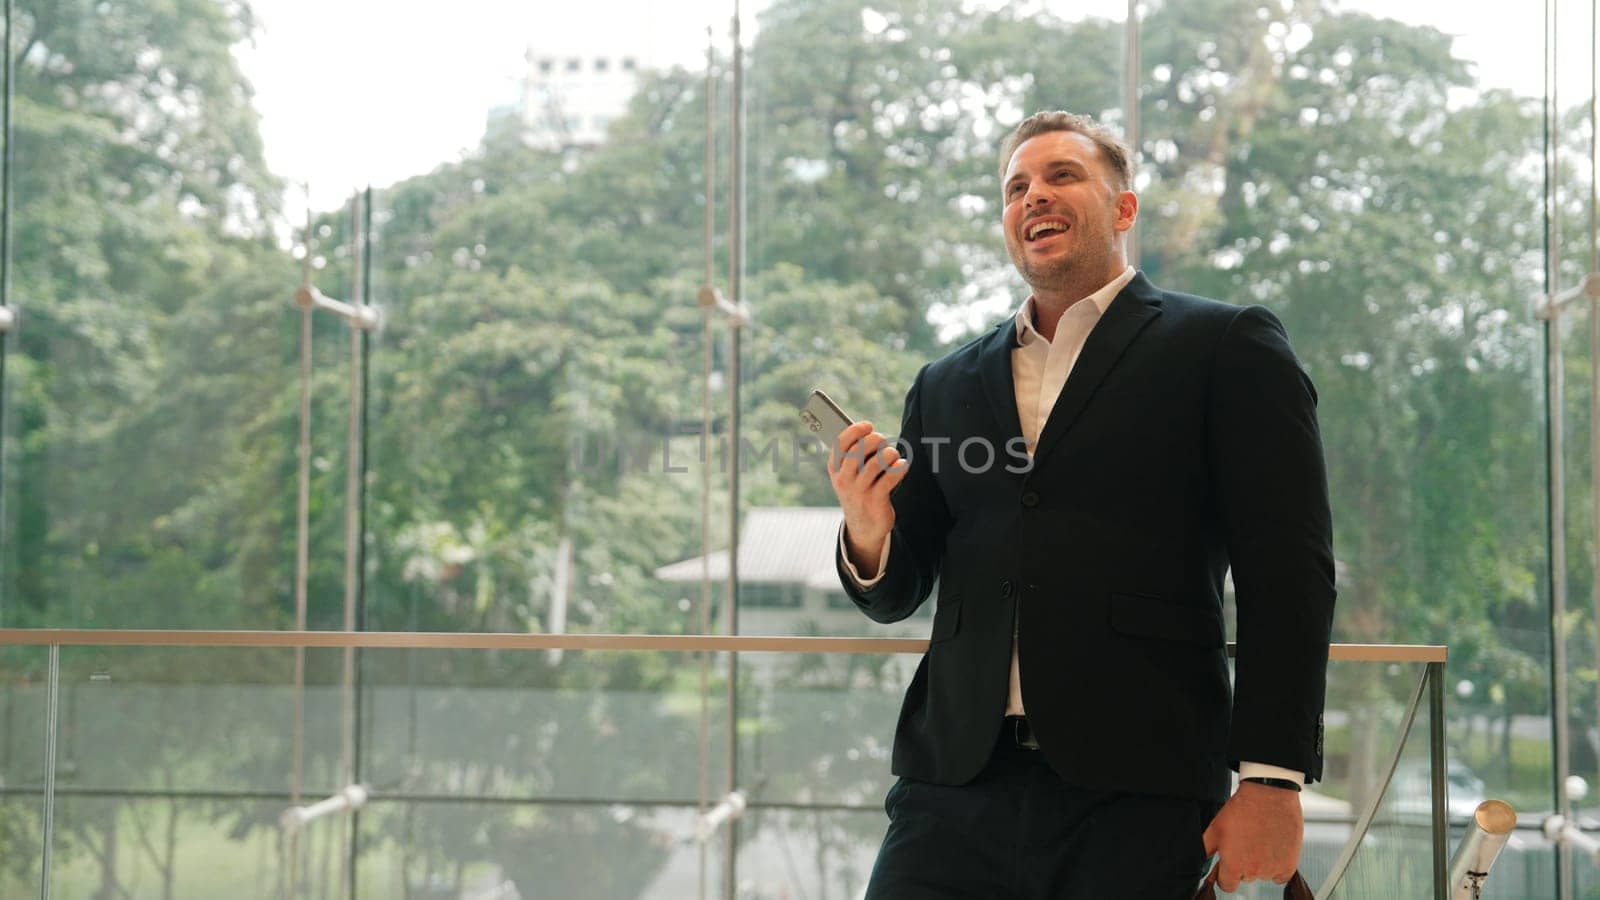 Caucasian businessman calling manager by using smart phone and discuss about financial report. Male leader talking marketing team by using telephone while standing at stair in modern building. Urbane.